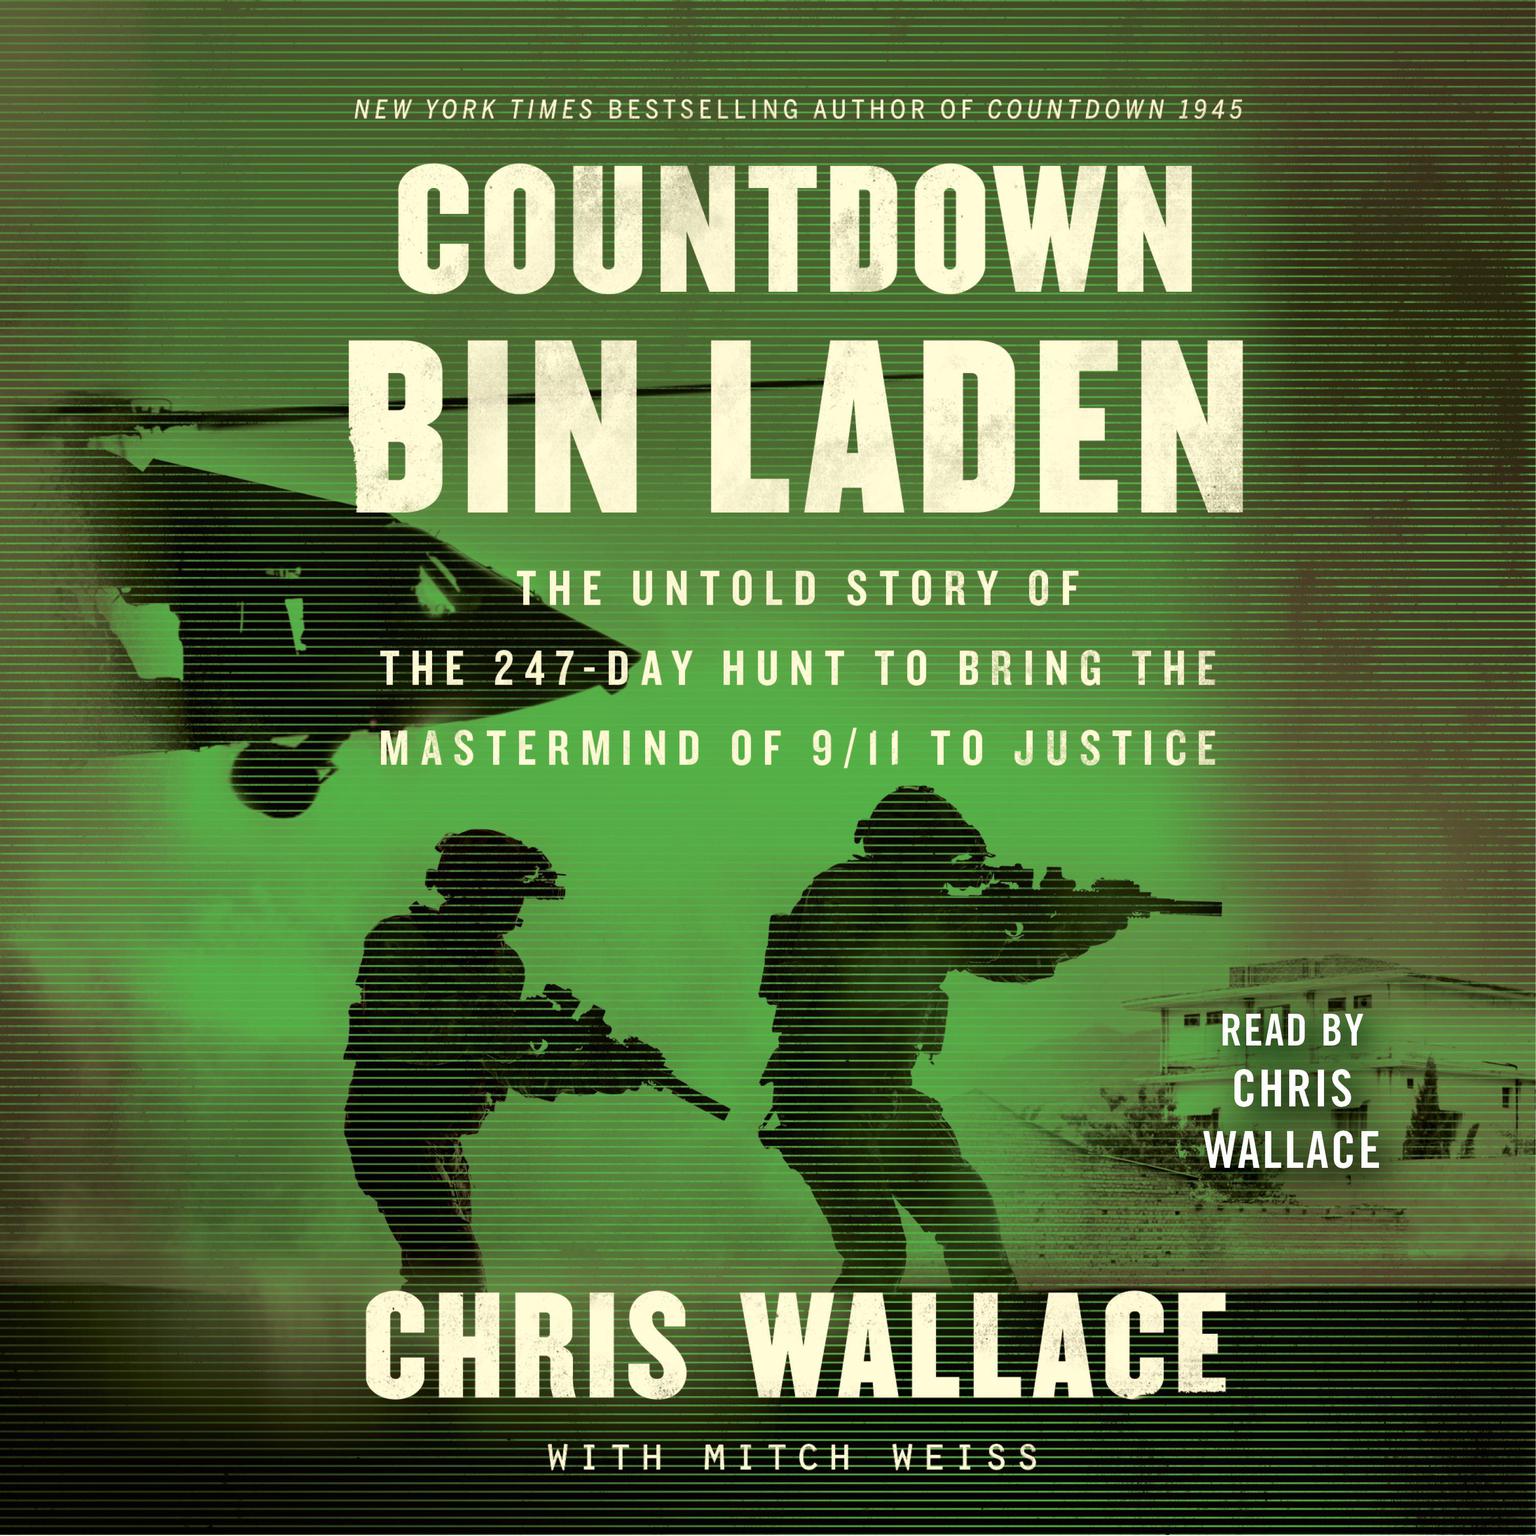 Countdown bin Laden: The Untold Story of the 247-Day Hunt to Bring the Mastermind of 9/11 to Justice Audiobook, by Chris Wallace